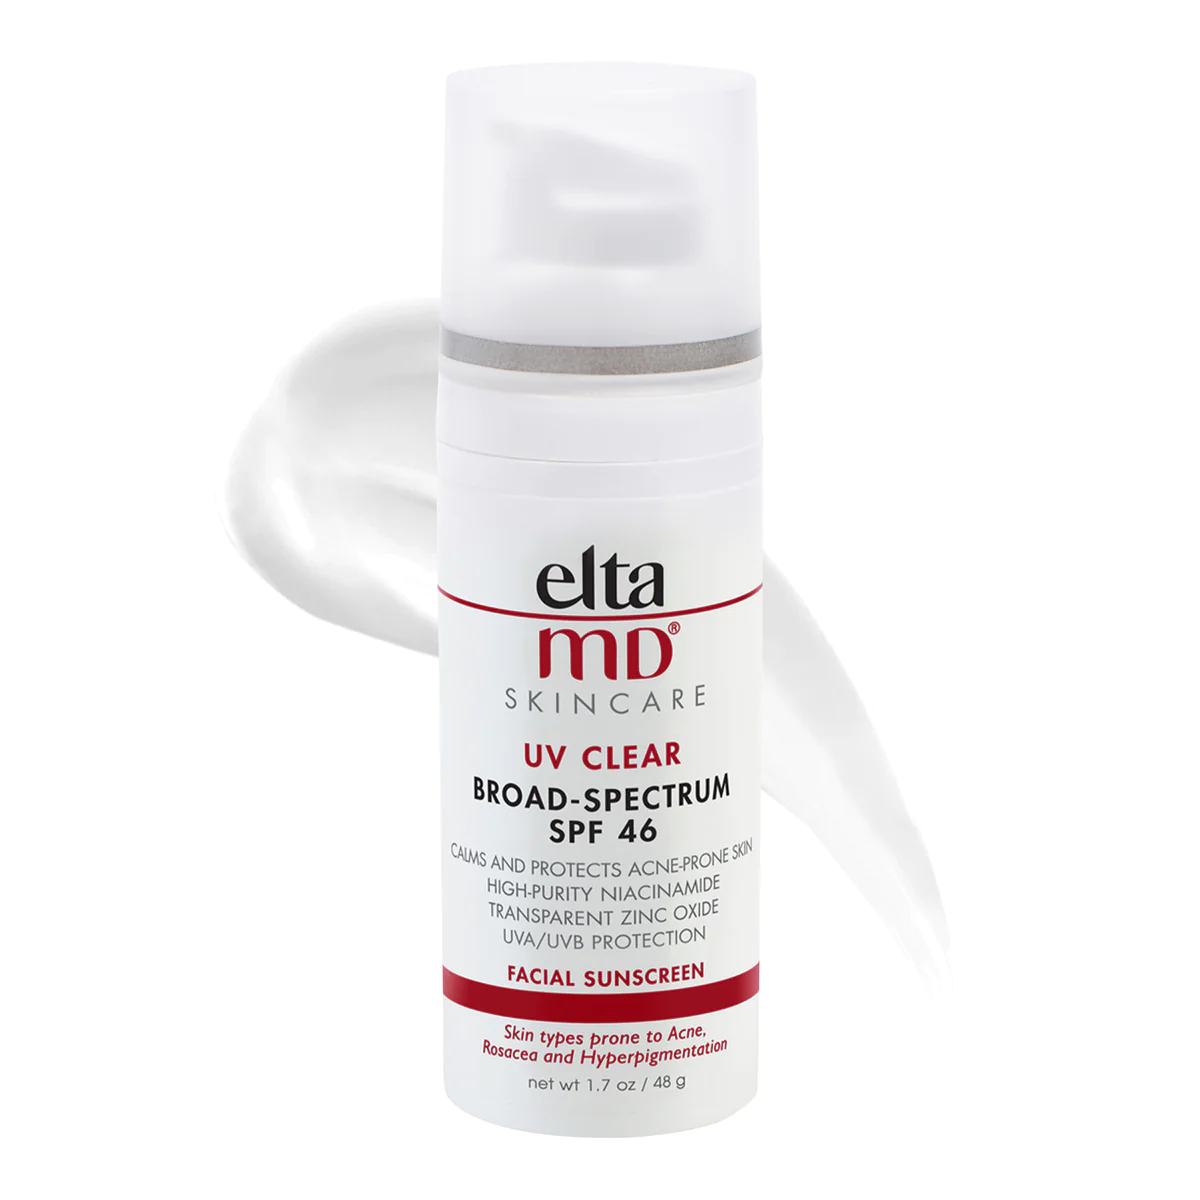 FEMMENORDIC's choice in the Elta MD Tinted vs Clear sunscreen comparison, the Elta MD UV Clear Facial Sunscreen